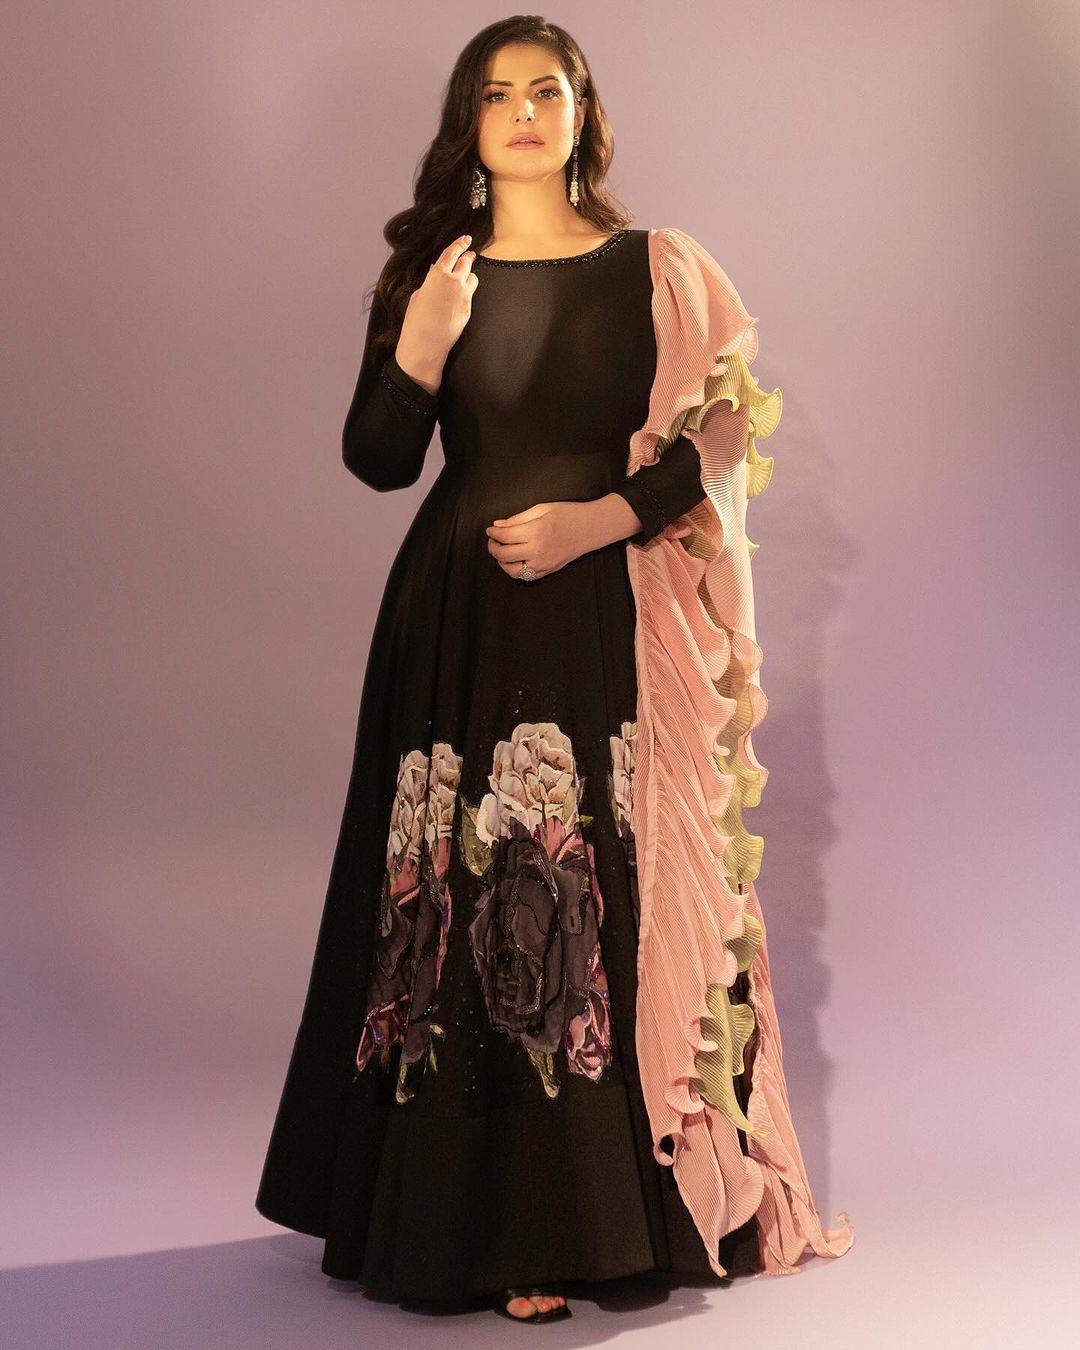 In another stunning appearance, Zareen wore a black Anarkali suit with beautiful flowers printed on the bottom